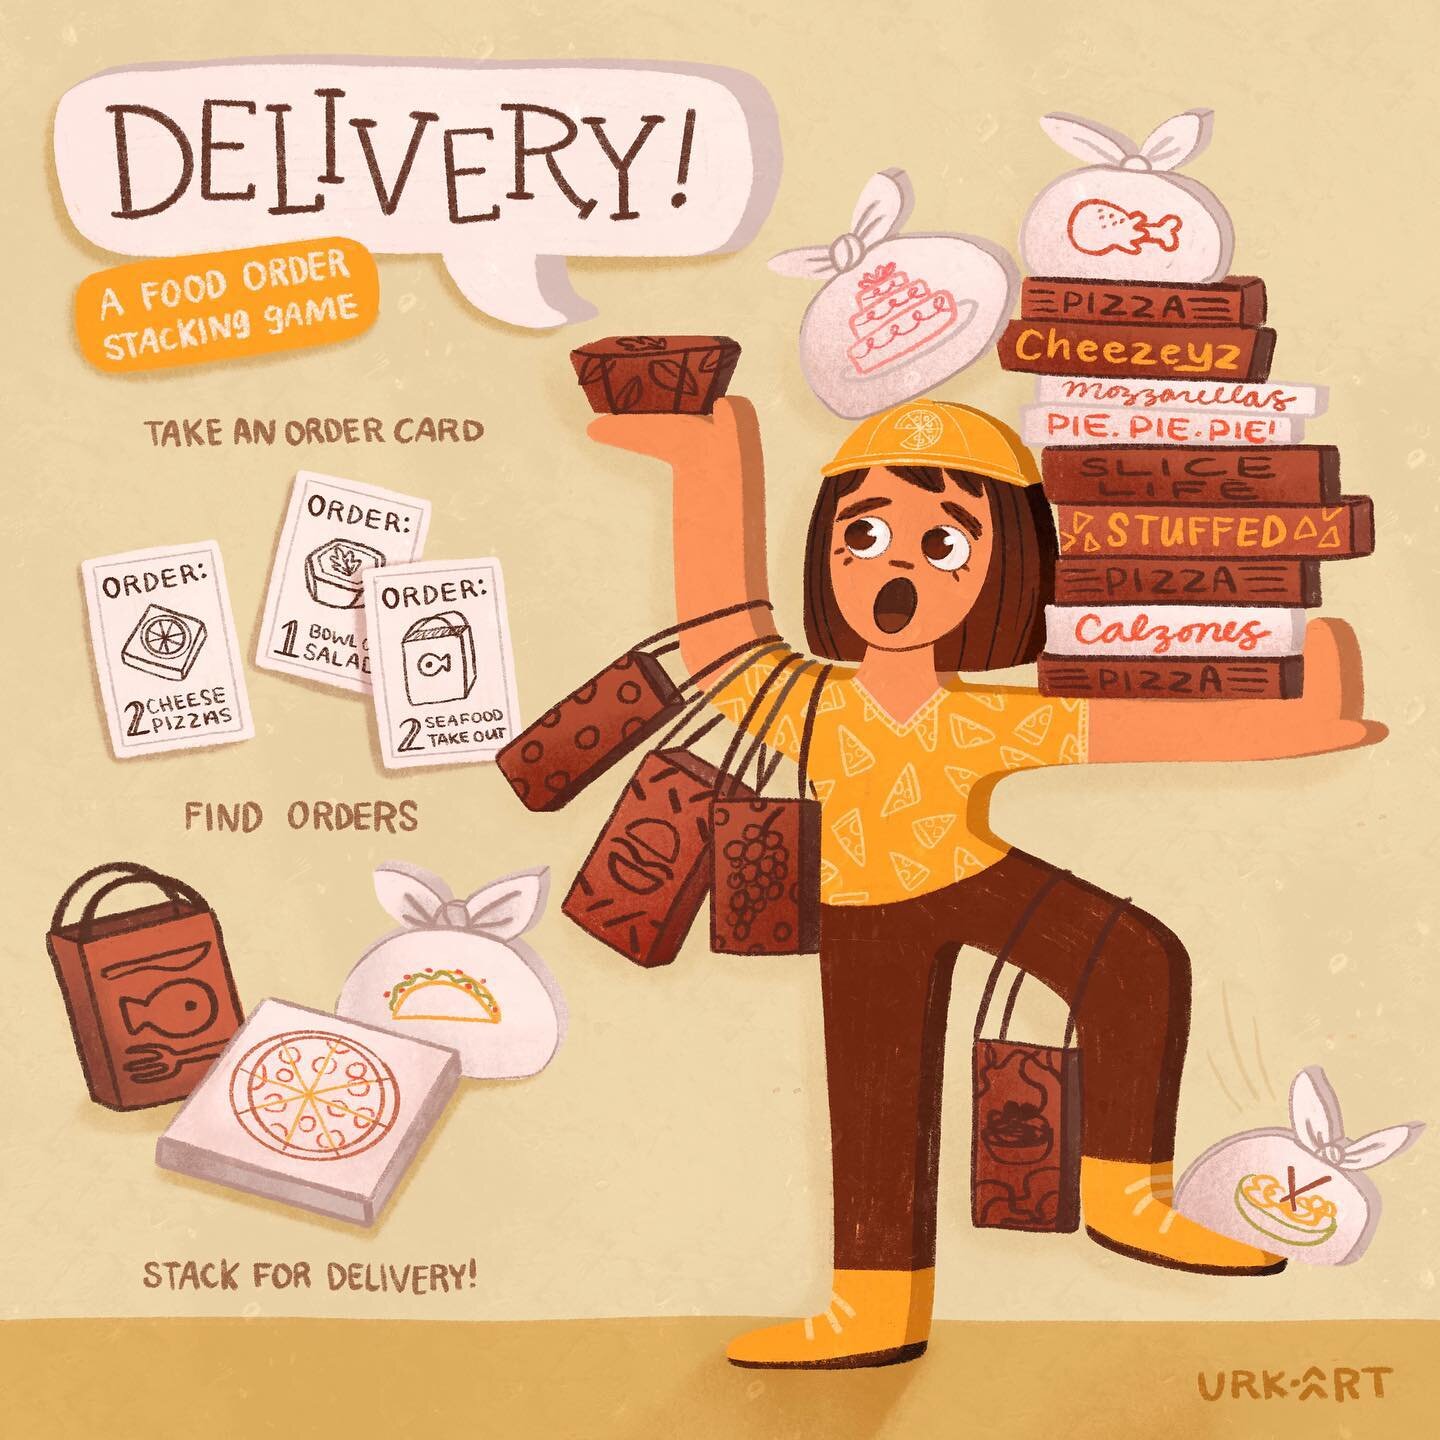 Delivery!! A food order stacking game concept I developed for @makeartthatsells toy pitch class! 
.
.
.
.
.
#mytoypitch #mytoypitch2022 #matstoypitch #matsmytoypitch #makeartthatsells #toycreation #toydesign #stackingtoys #fooddelivery #womeninillust